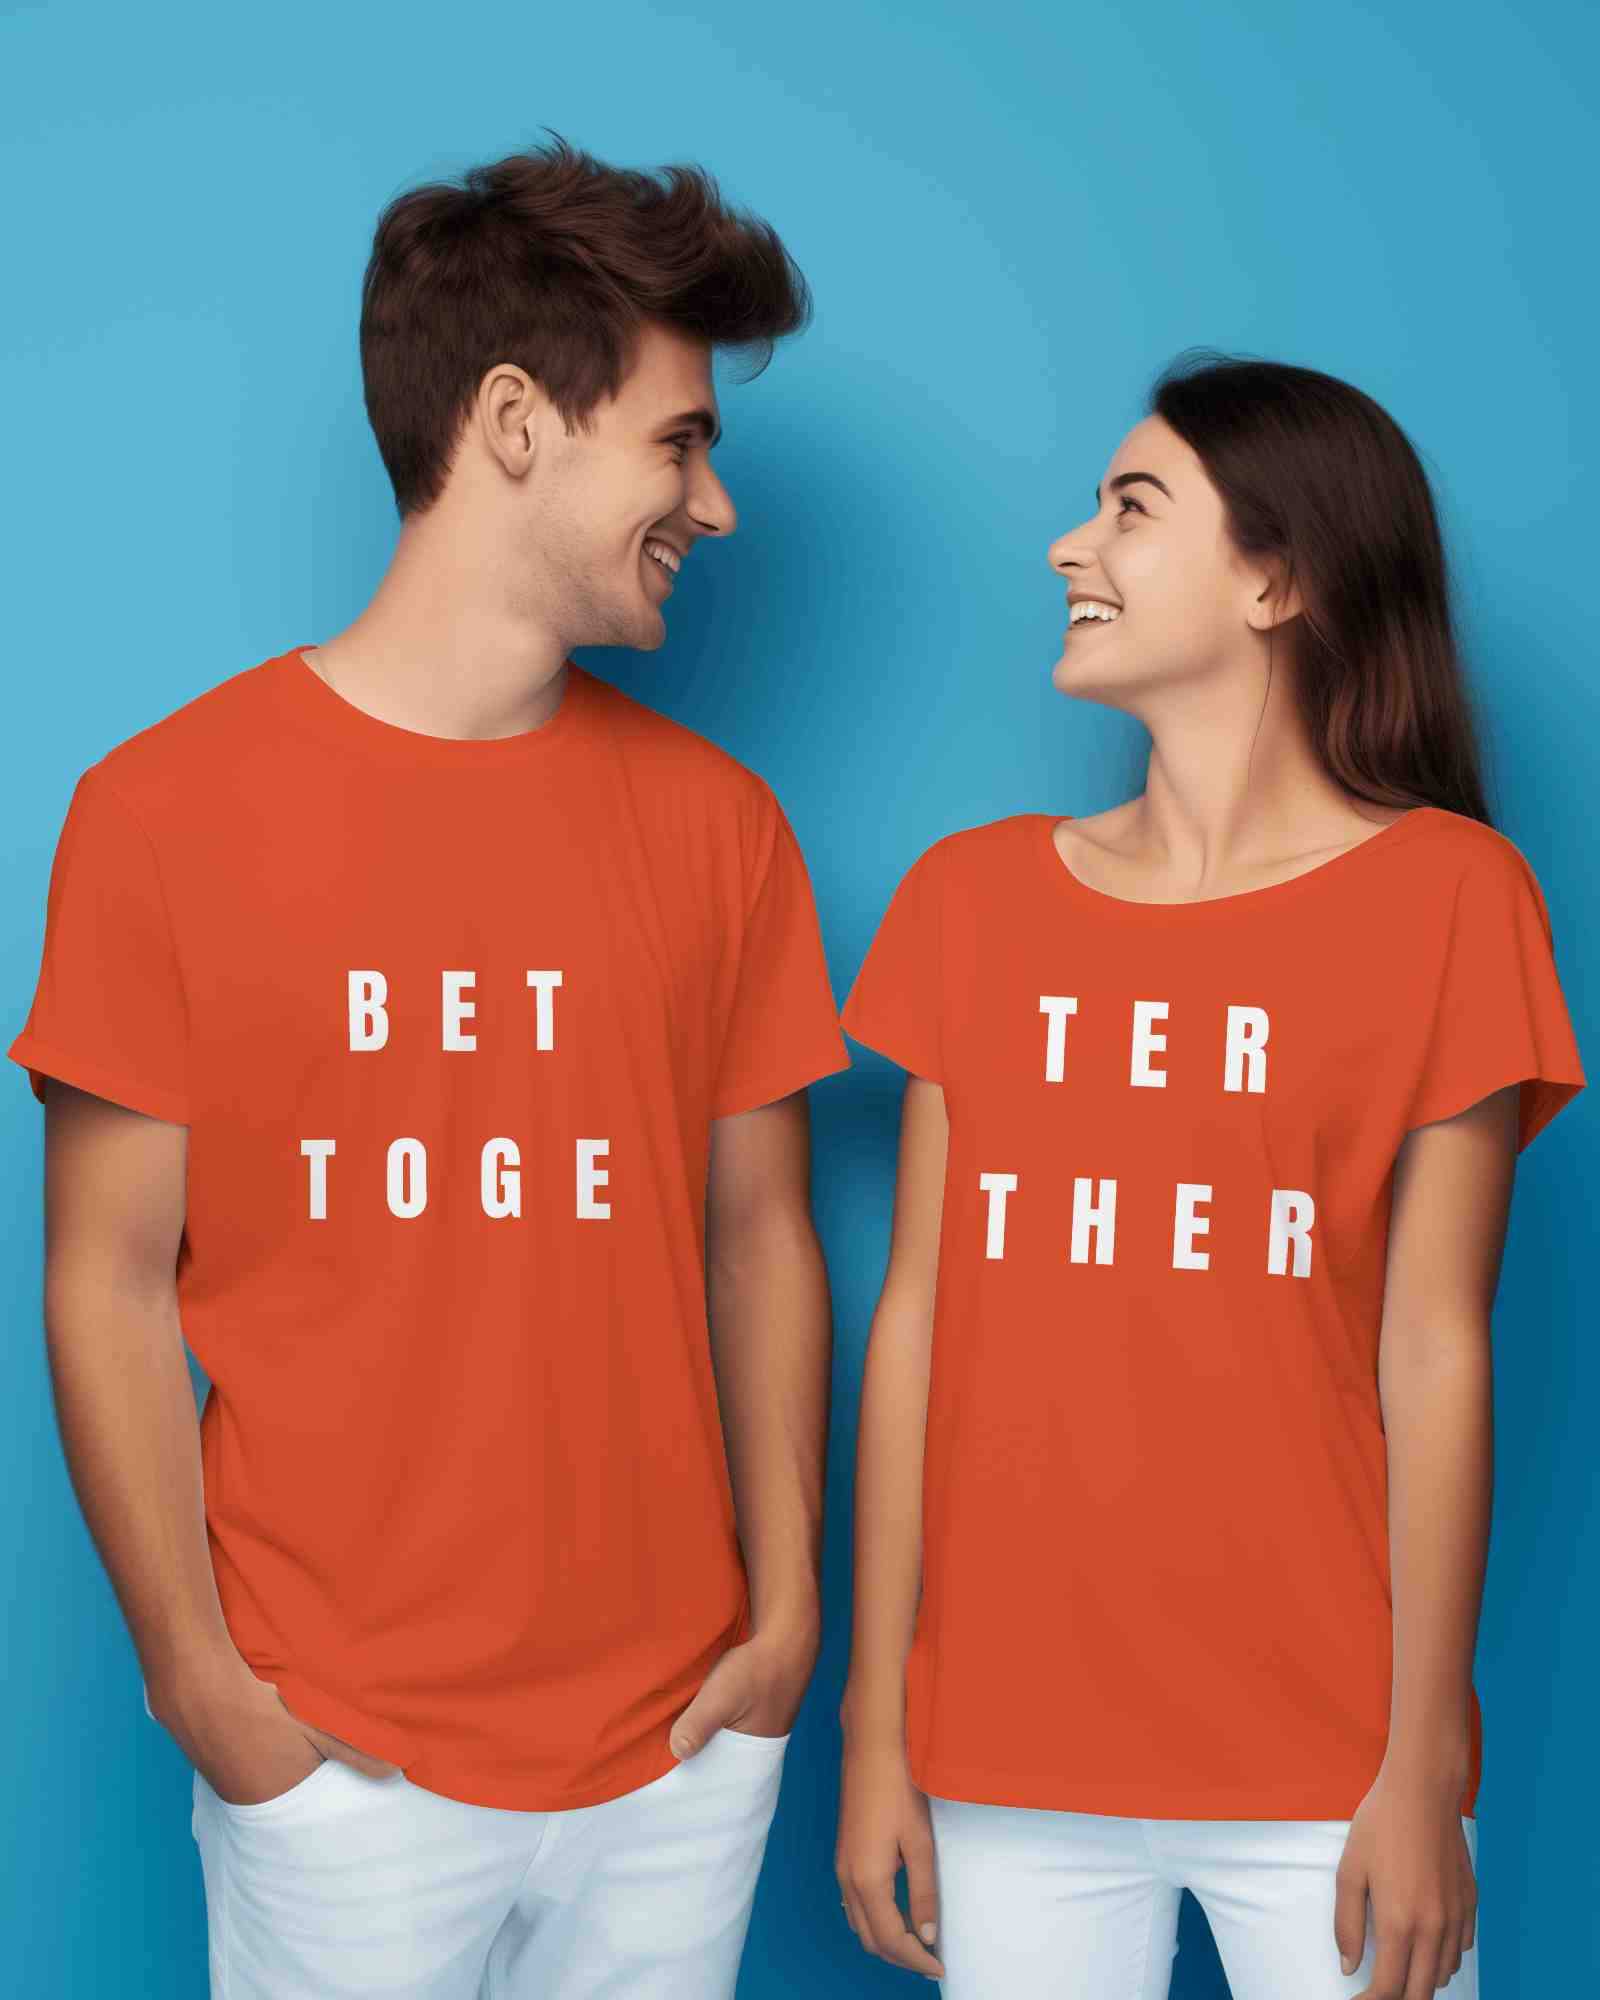 Better Together His and Hers Shirts | Couples Matching Shirts